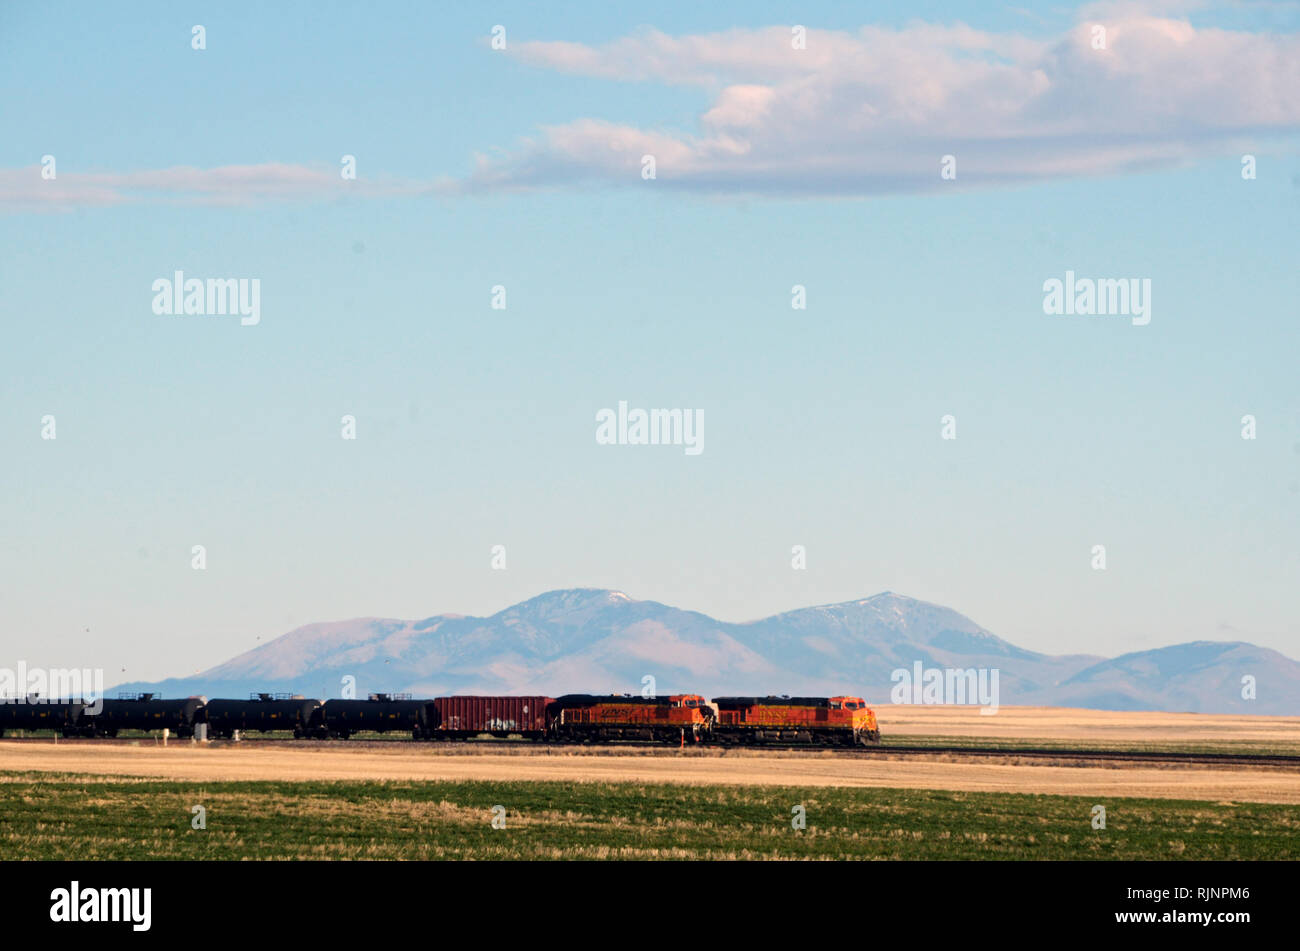 BNSF train with oil tank cars travels across the Great Plains of Montana with the Sweetgrass Hills in the background. Stock Photo